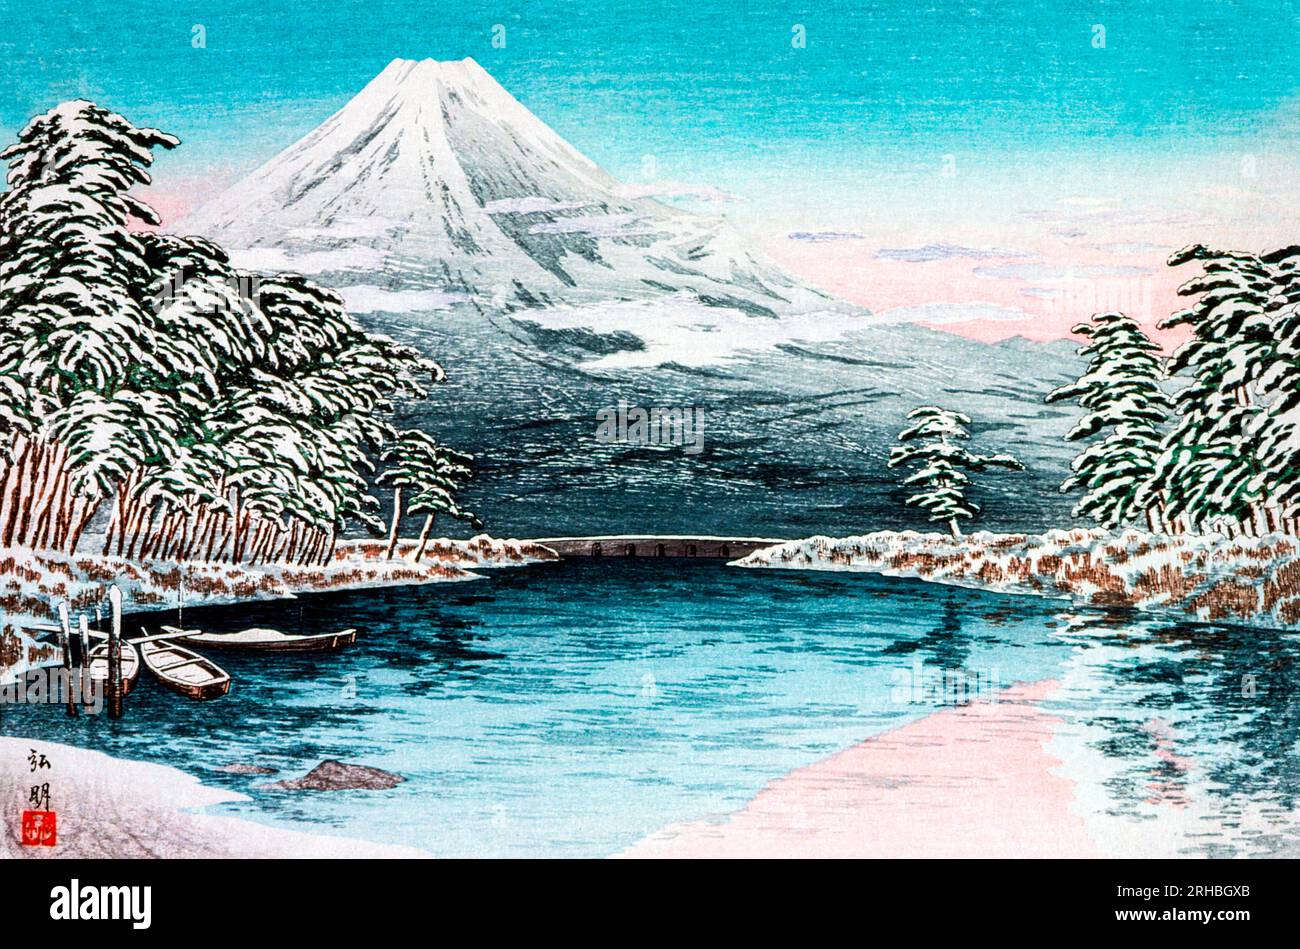 Mt. Fuji from Tagonoura, Snow Scene  print in high resolution by Hiroaki Takahashi. Original from The Los Angeles County Museum of Art. Stock Photo